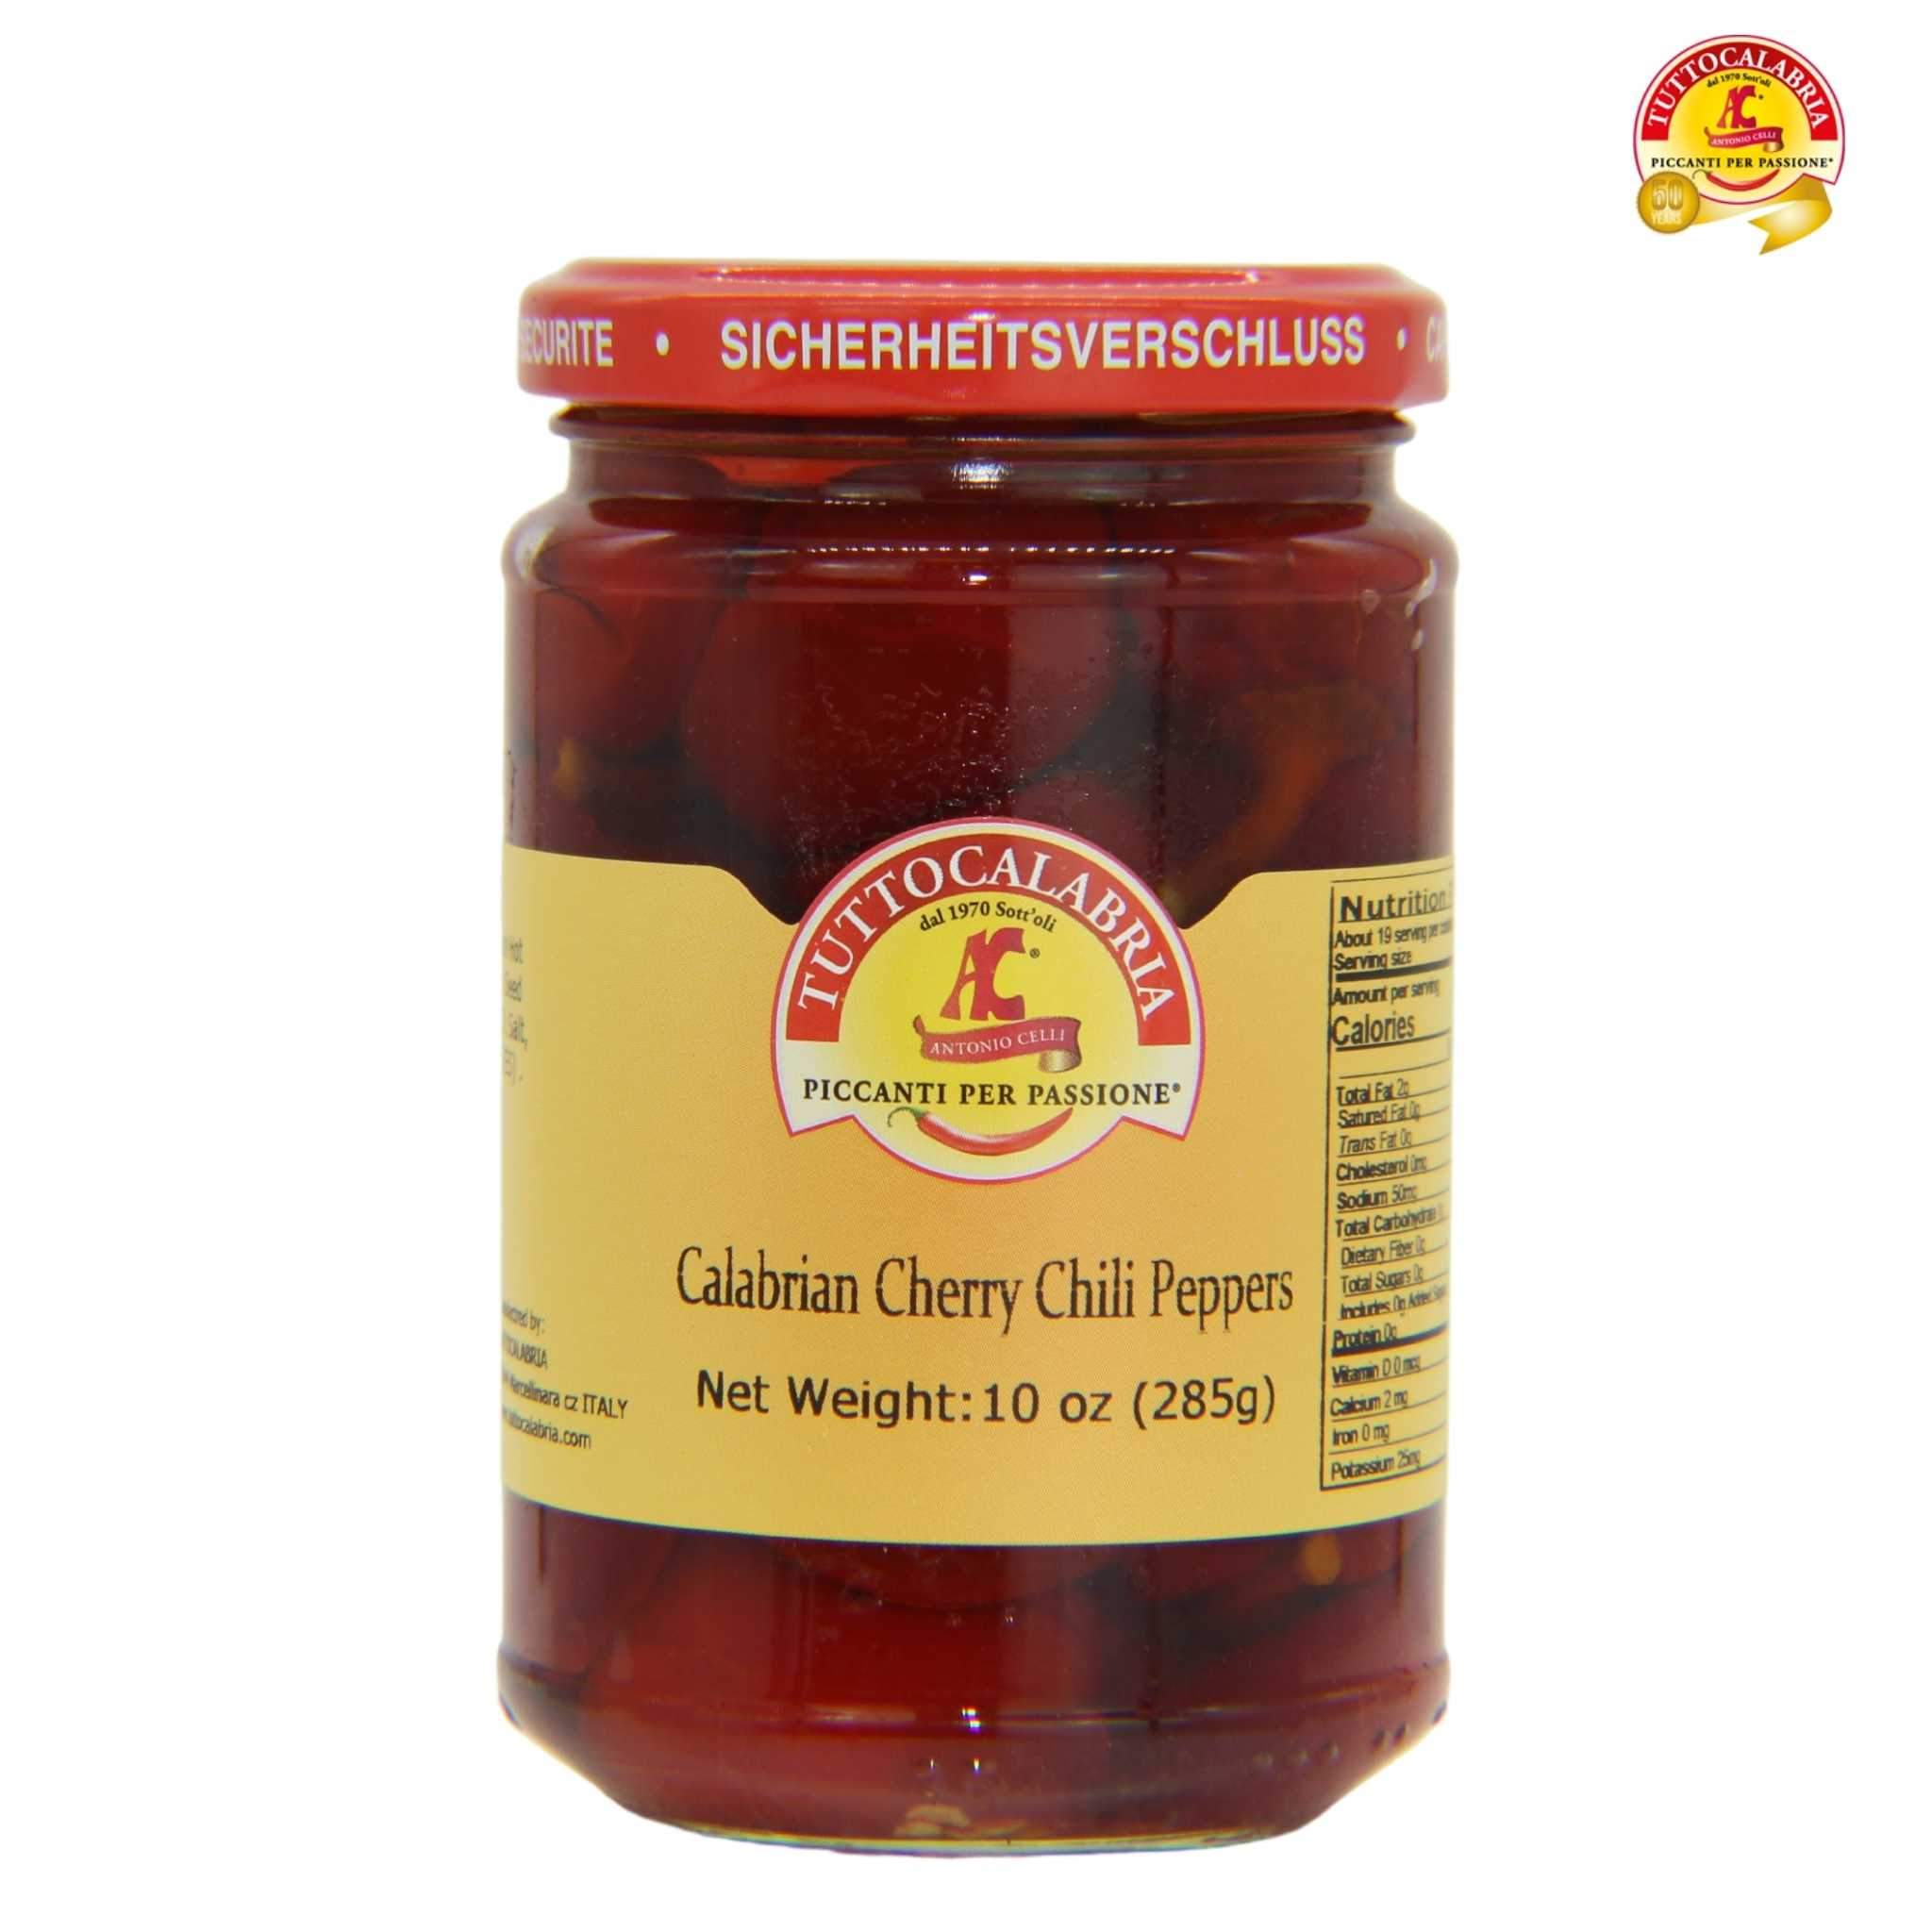 Calabrian Cherry Chili Peppers 9.8oz